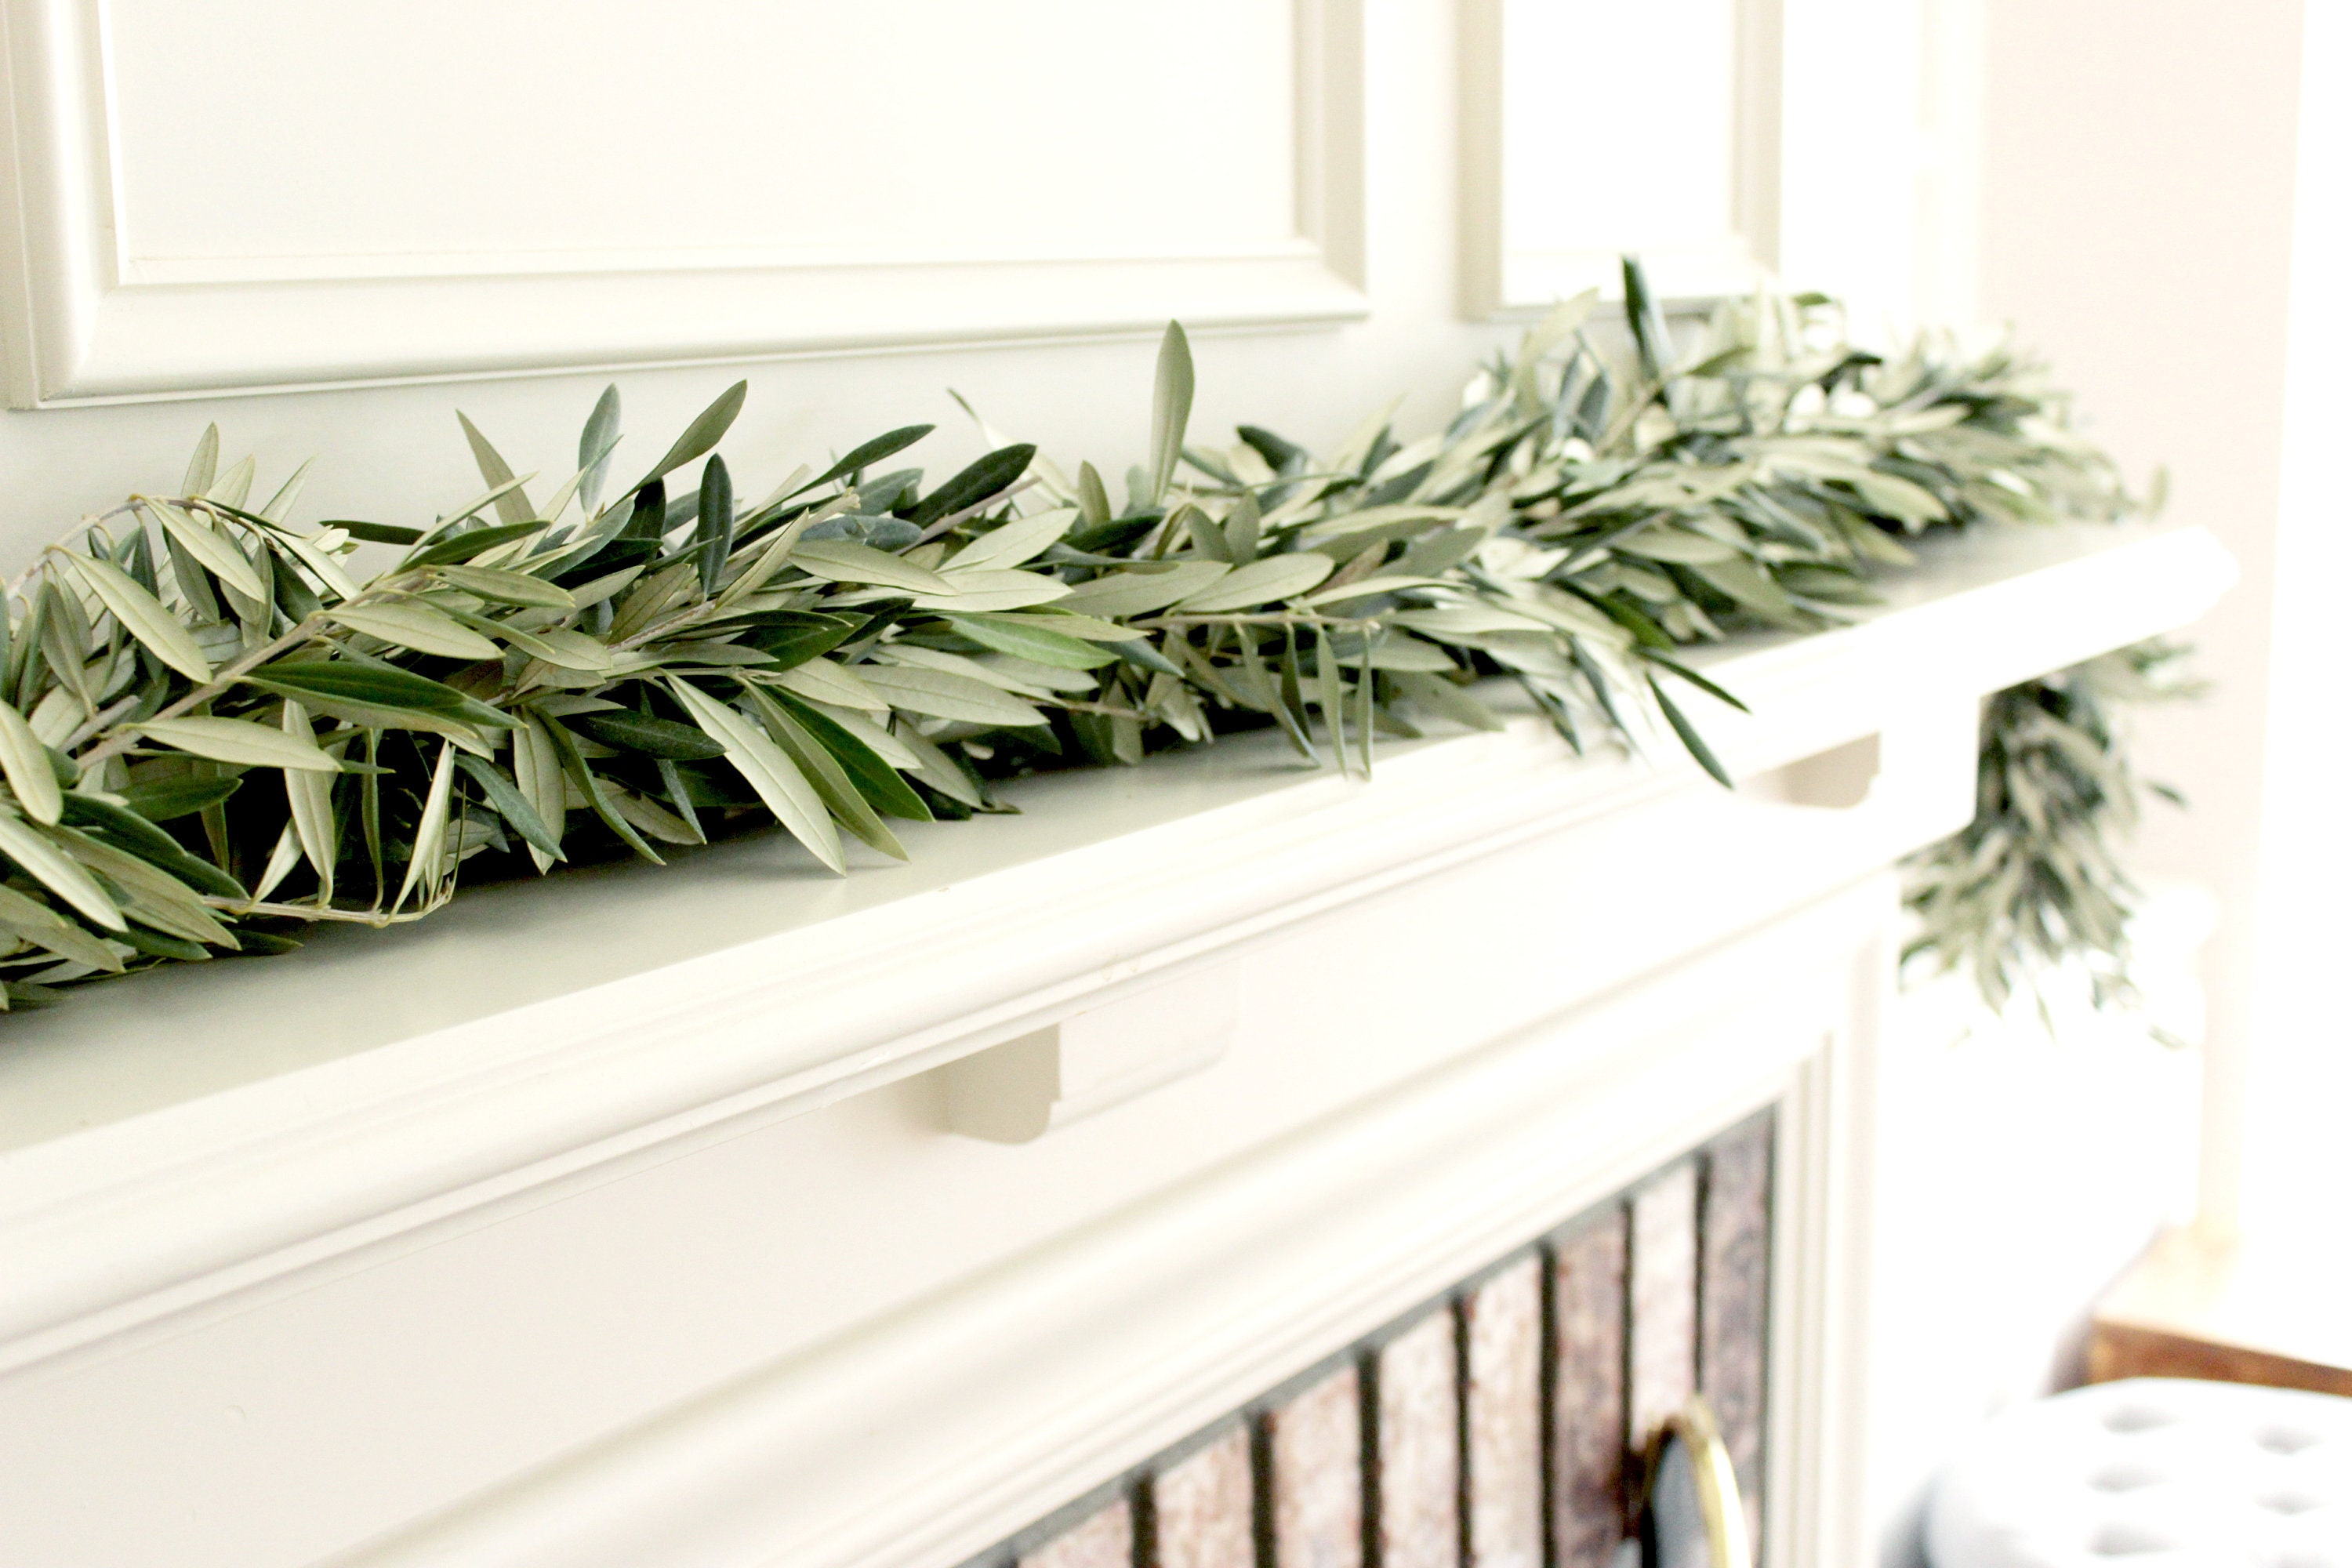 Handmade Fresh Olive Branch Greenery Garland for Wedding, Home Decor,  Holiday Party, Christmas Table Decor 